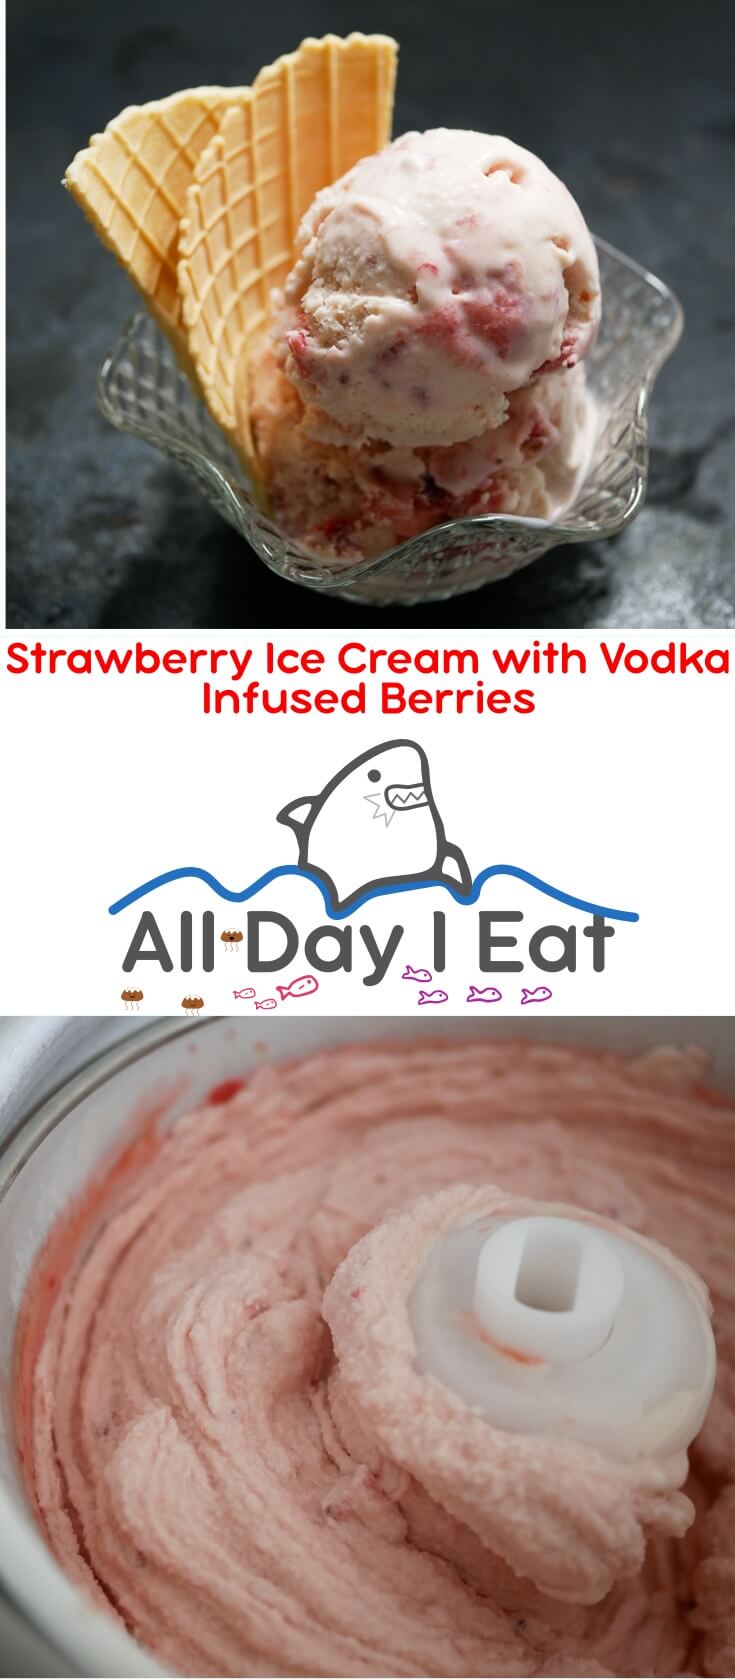 Strawberry Ice Cream with Vodka Infused Berries is an alcohol fueled twist on a classic ice cream. The strawberries used were at peak ripeness enabling me to cut back on the sugar. Serve the ice cream with with a waffle cone or a bit of whipped cream and it might just mysteriously vanish before your eyes.